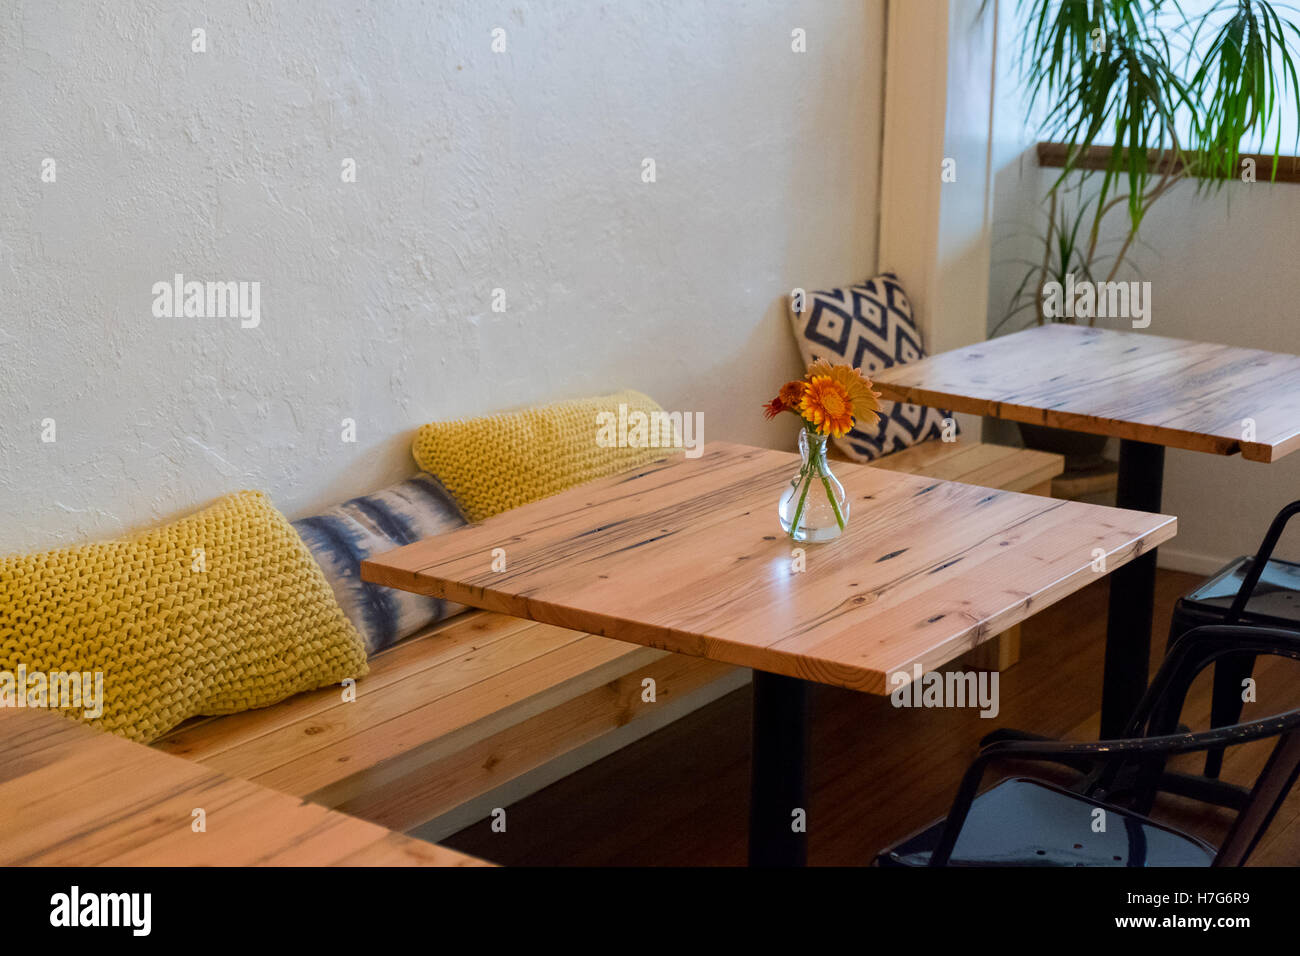 Bench Seating At A Coffee Shop Restaurant With Small Cafe Tables And Pillows Stock Photo Alamy